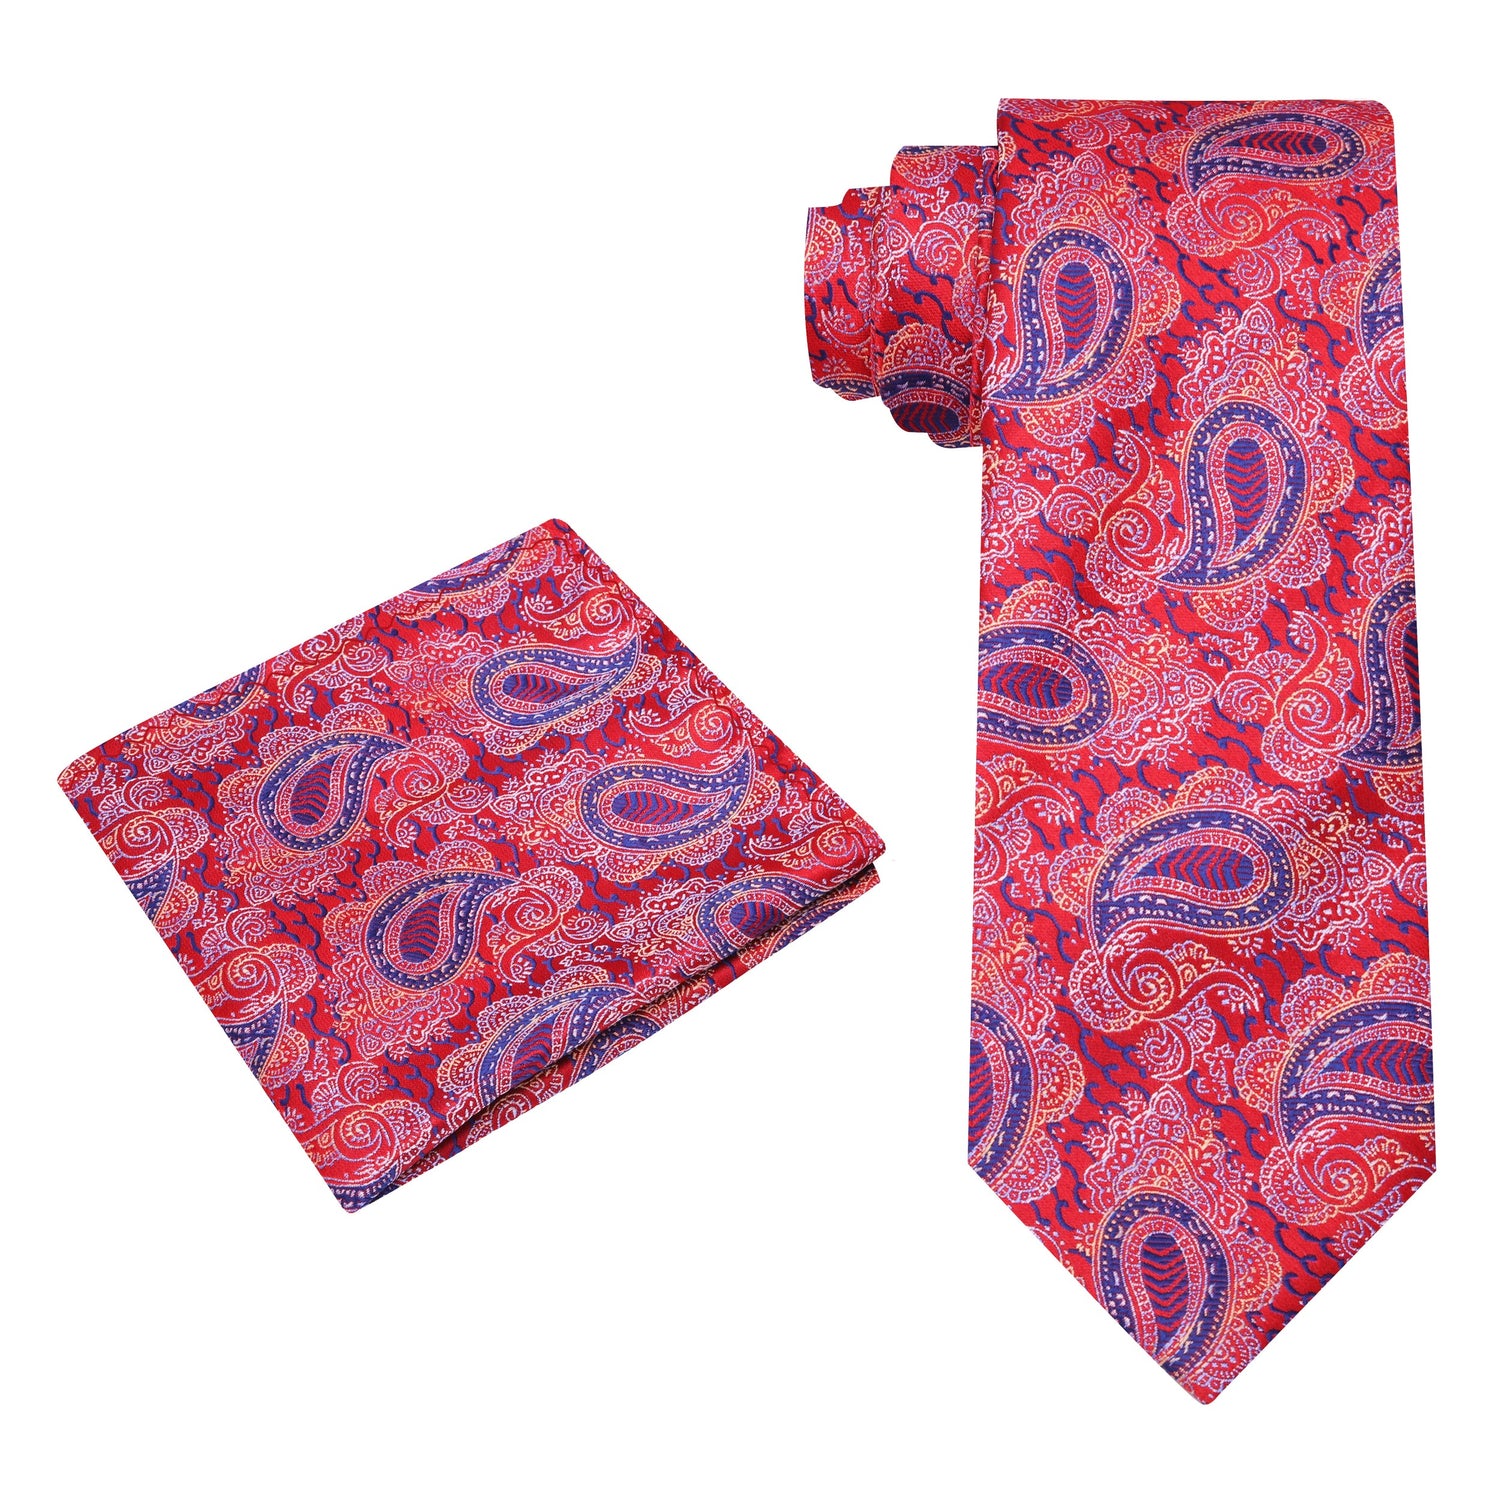 Alt View: Red with Blue Paisley Tie and Pocket Square